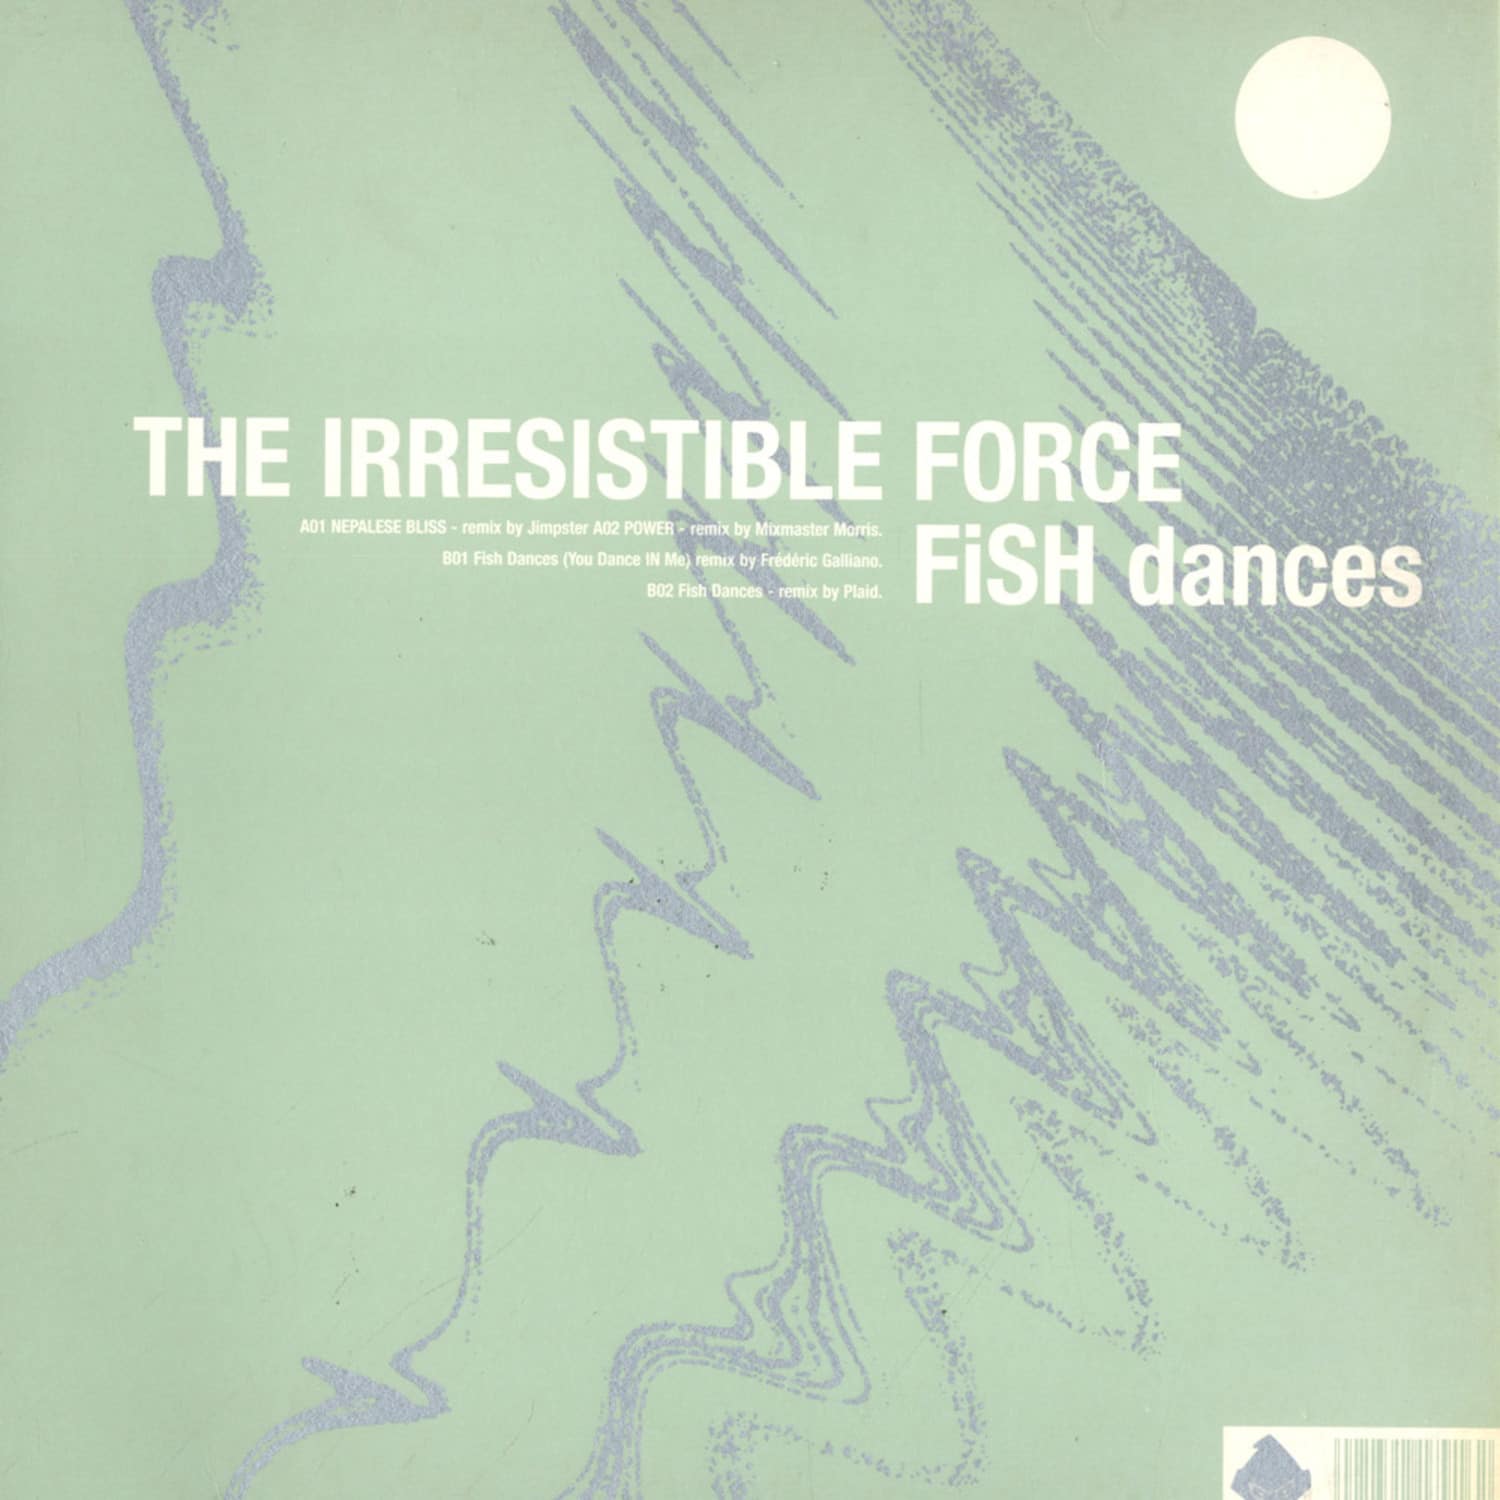 The Irresistible Force - FISH DANCES